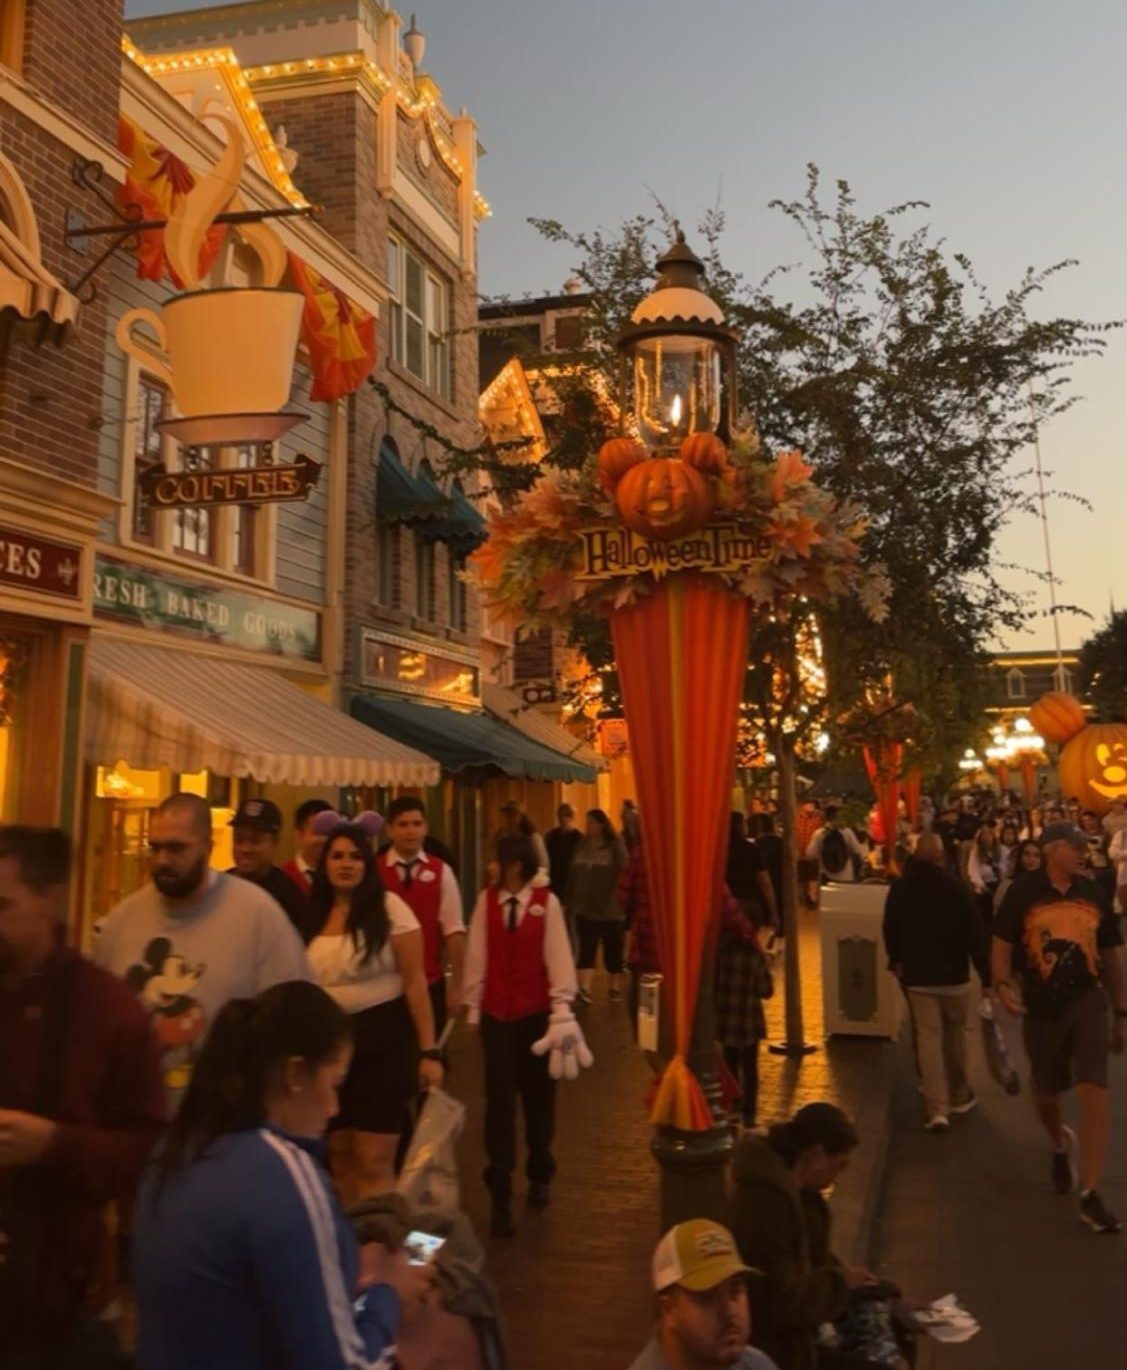 Disneylands main street filled with sights and scents of pumpkin